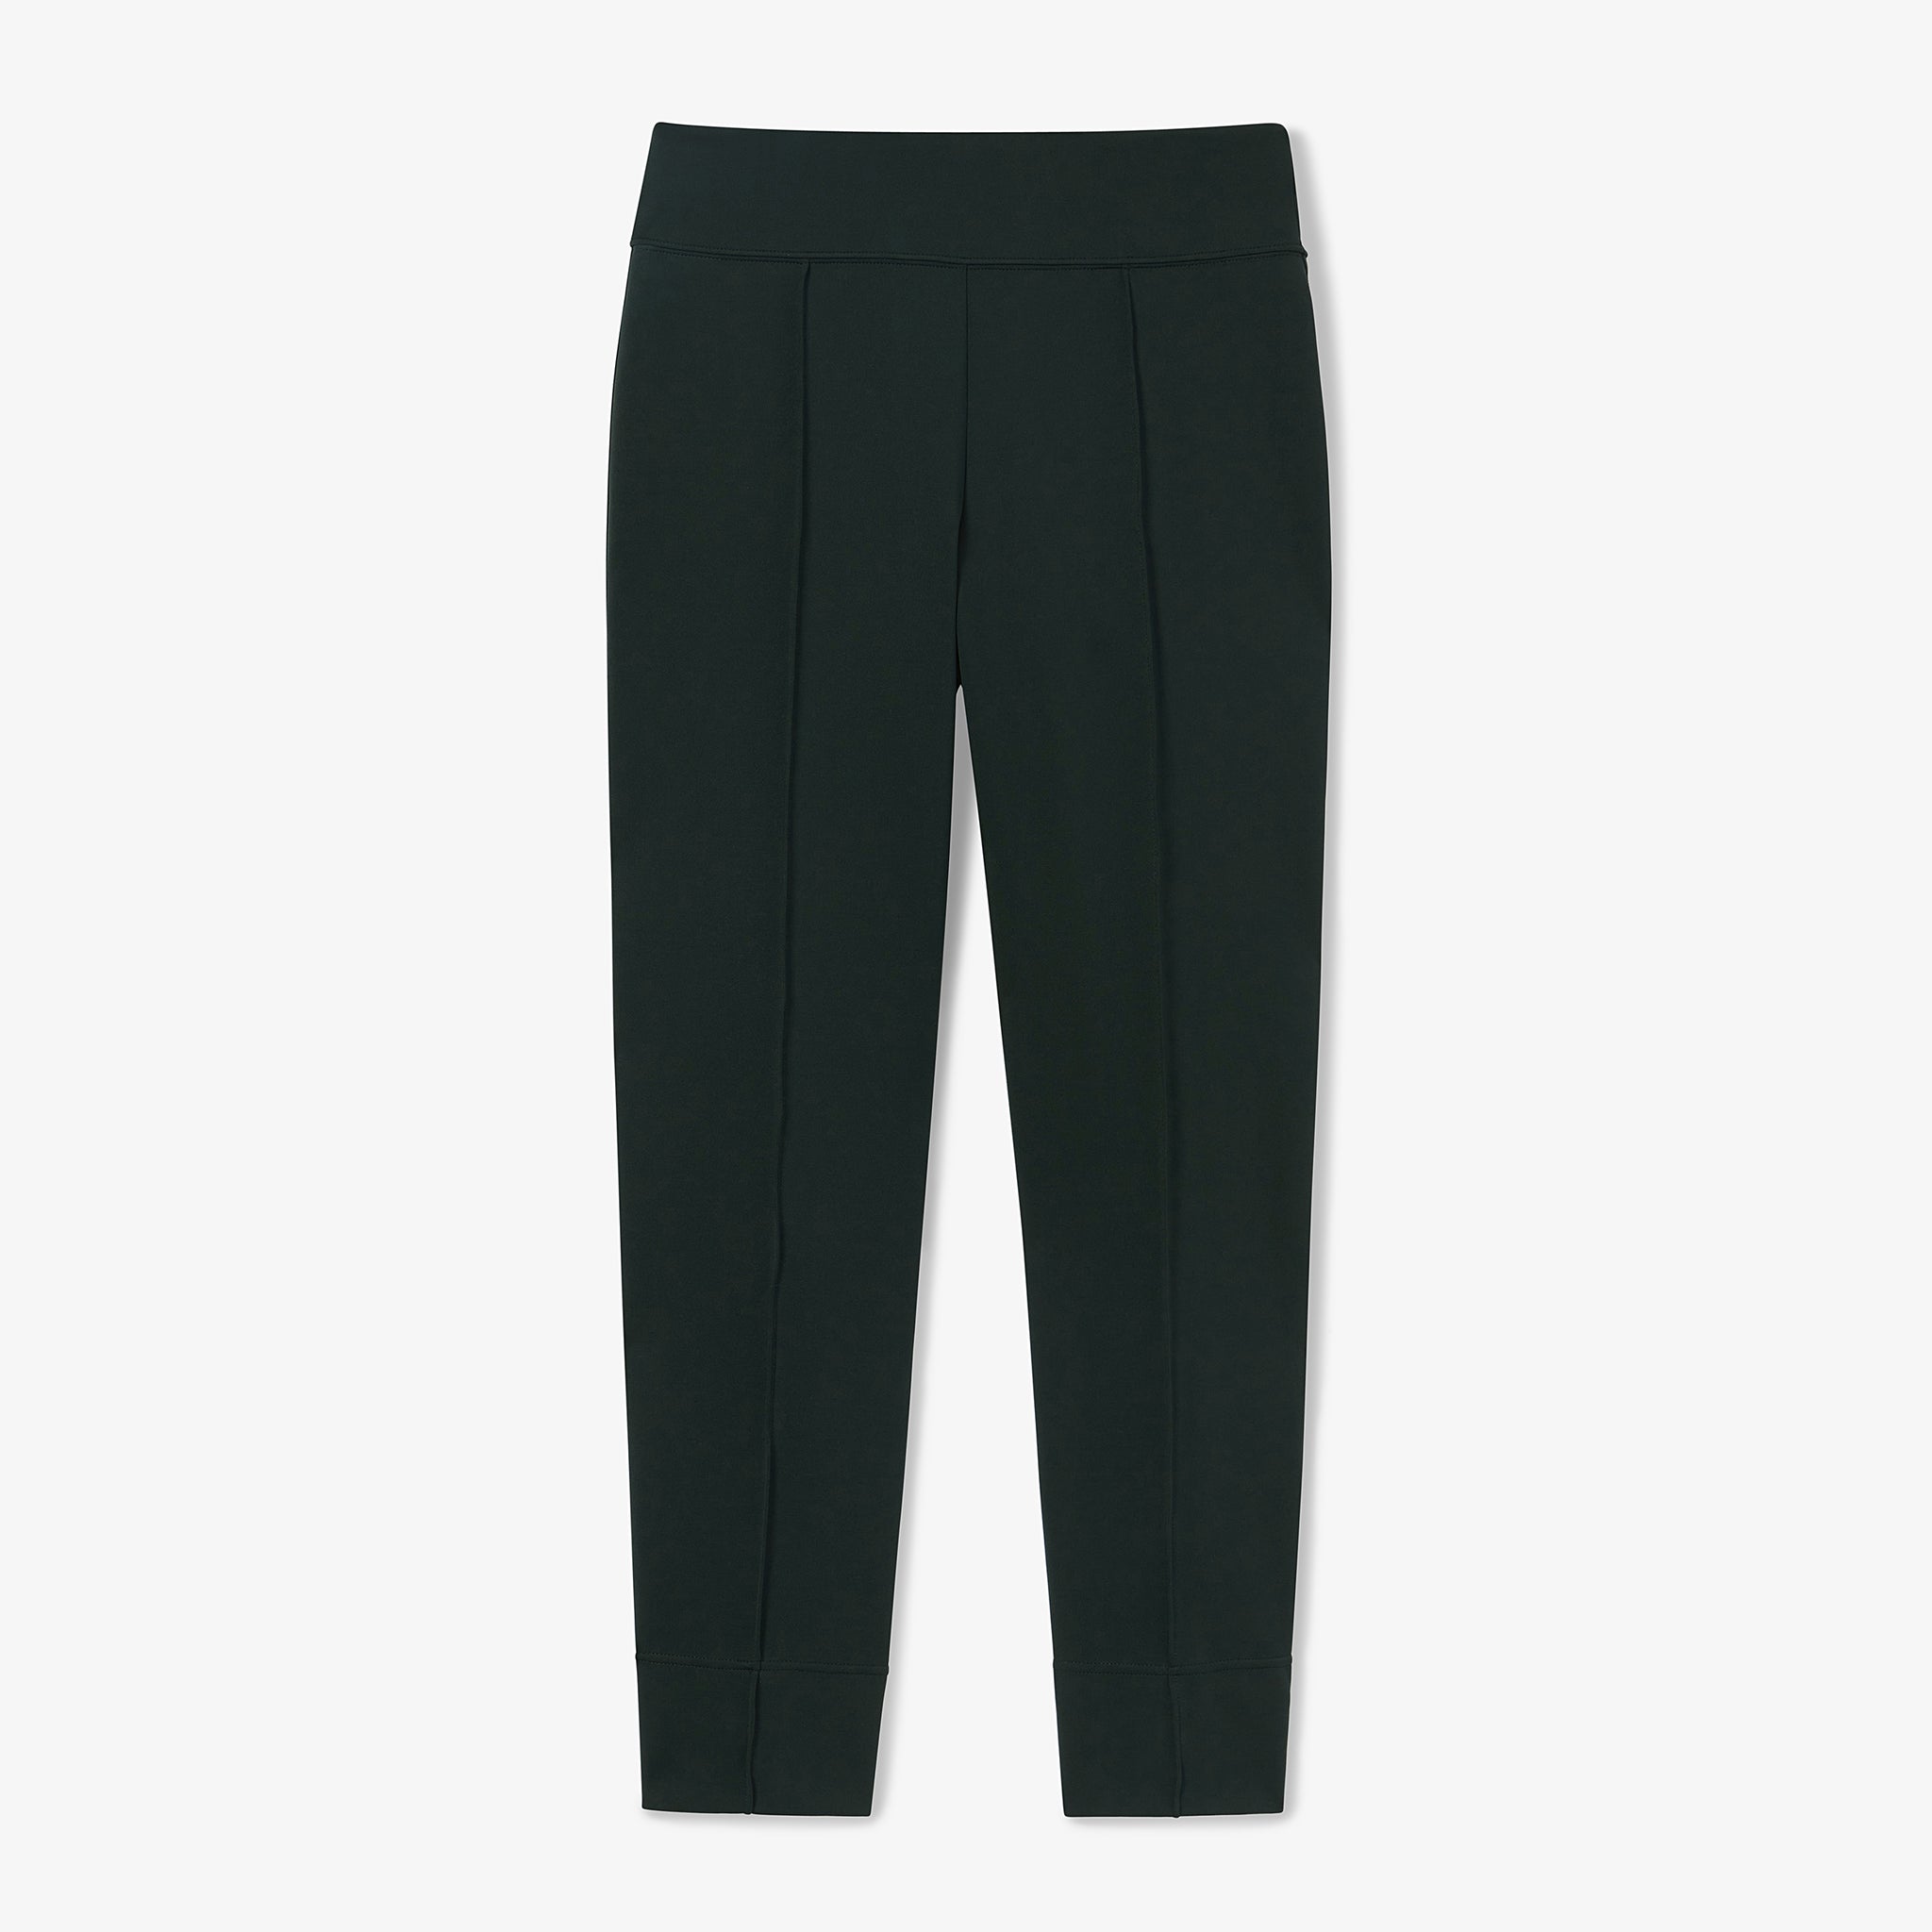 Packshot image of the Robin pant in Forest